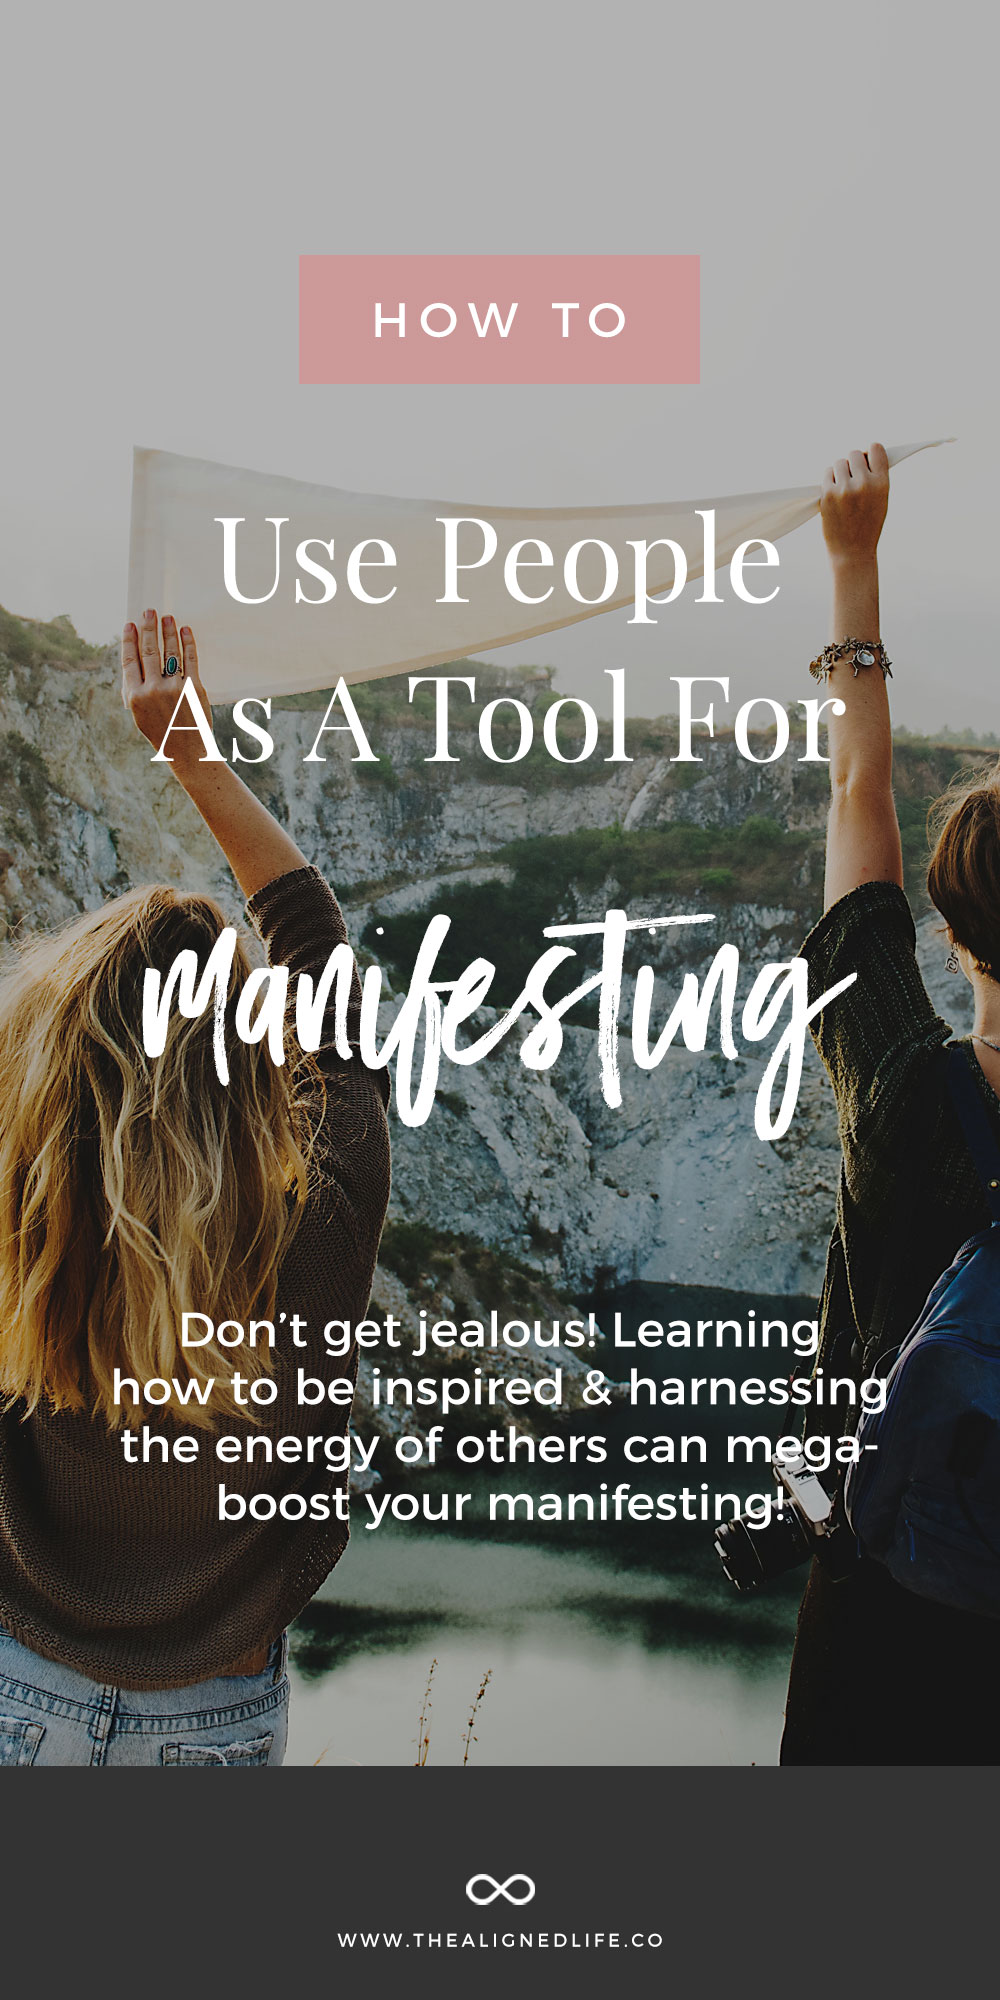 How To Use People As A Tool For Manifesting